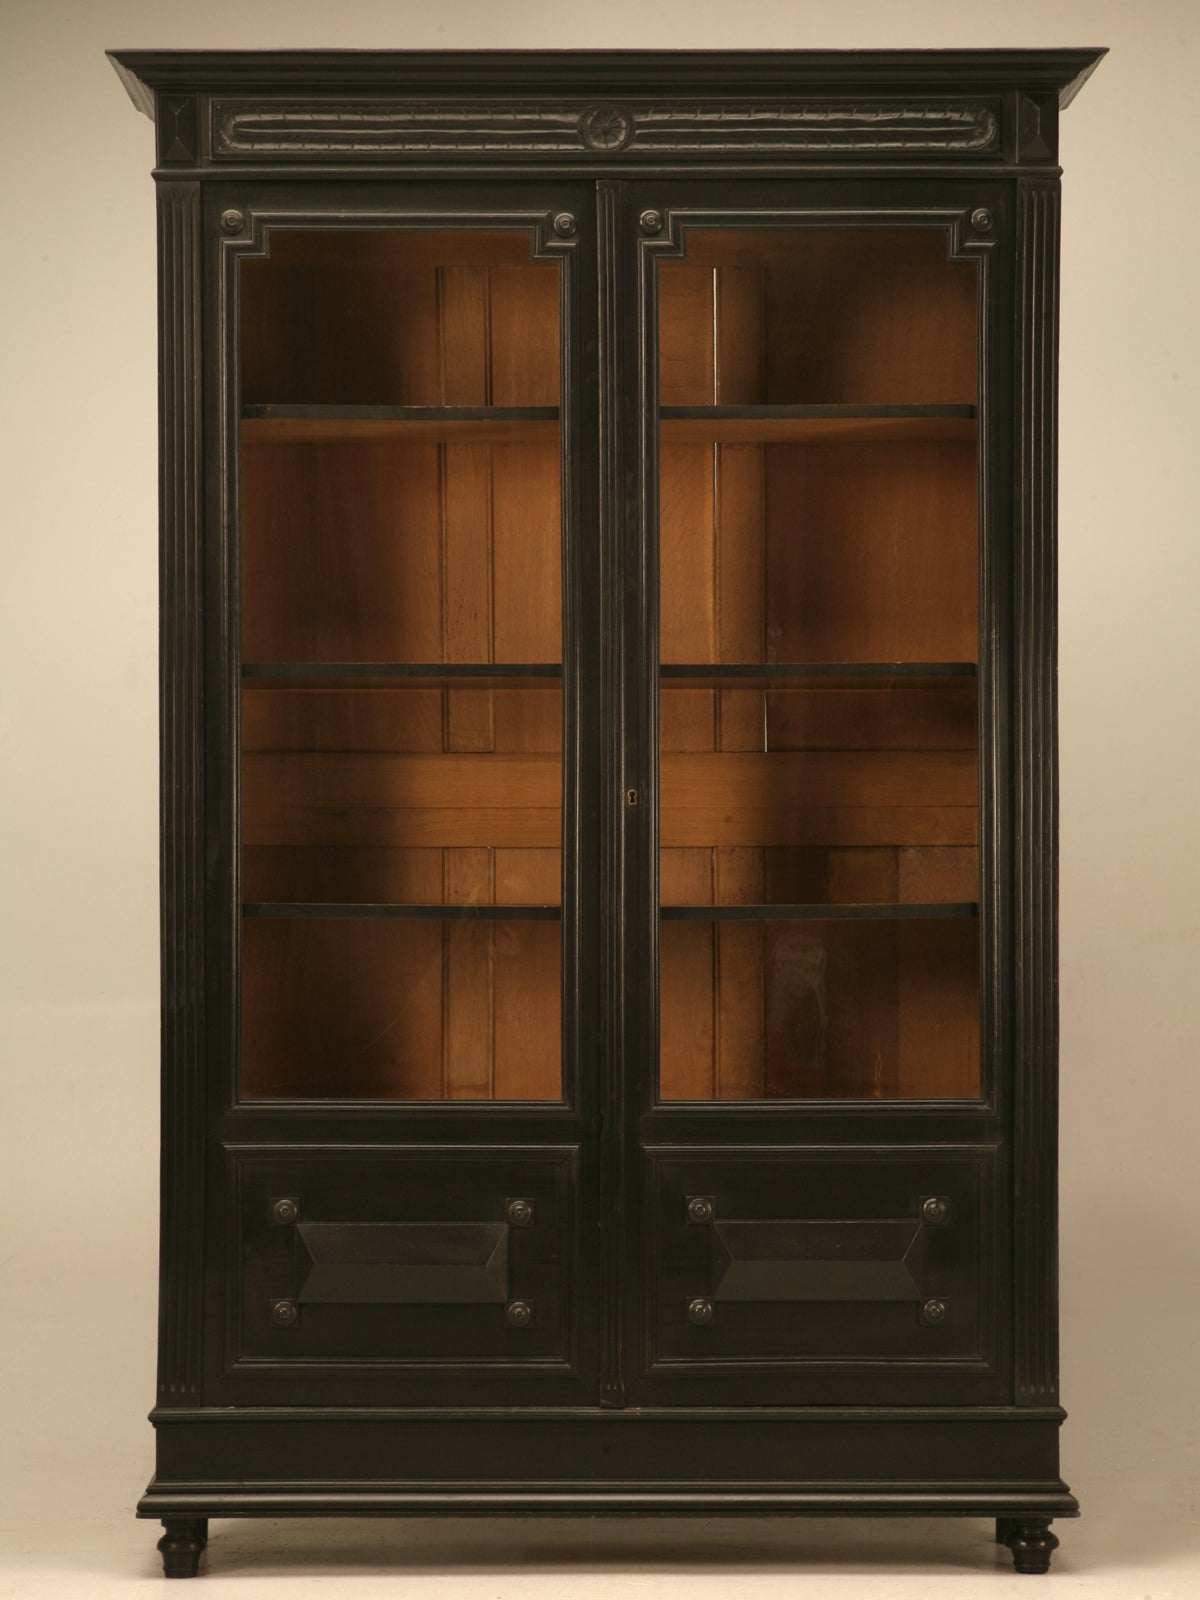 Antique French Napoleon III Bookcase or China Cabinet